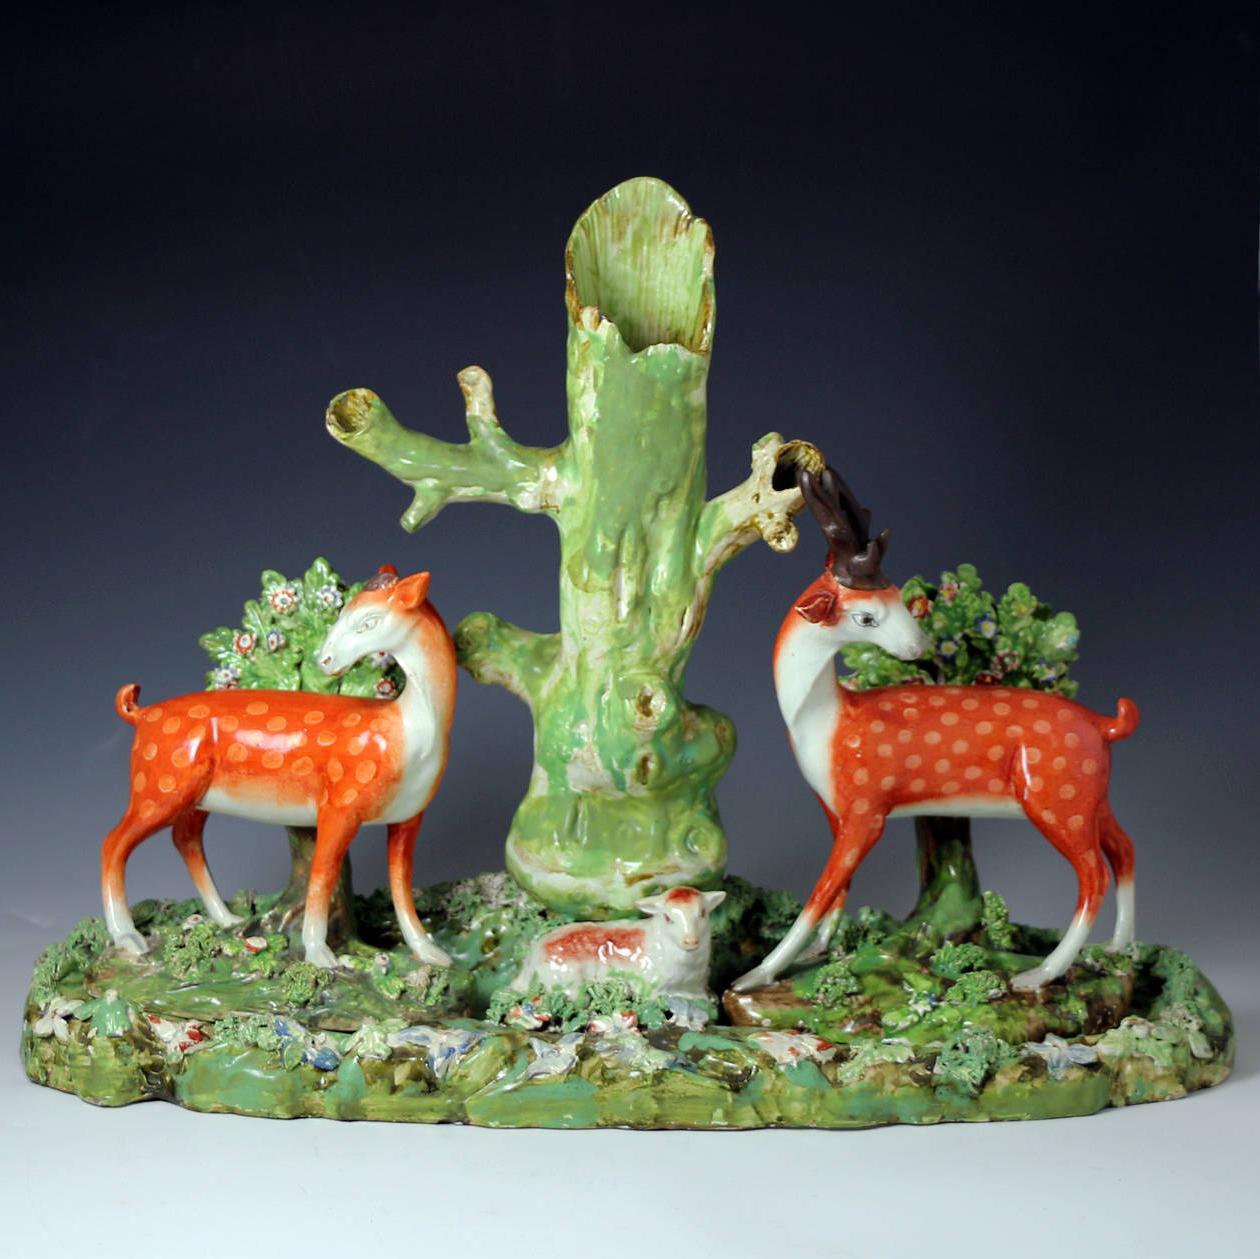 A rare and highly decorative Staffordshire pearlware tree trunk figure group.
The figures of the Doe and Stag with bocage are removable and sit on the large base which features the figure of a lamb. Figure groups of this size and complexity (16